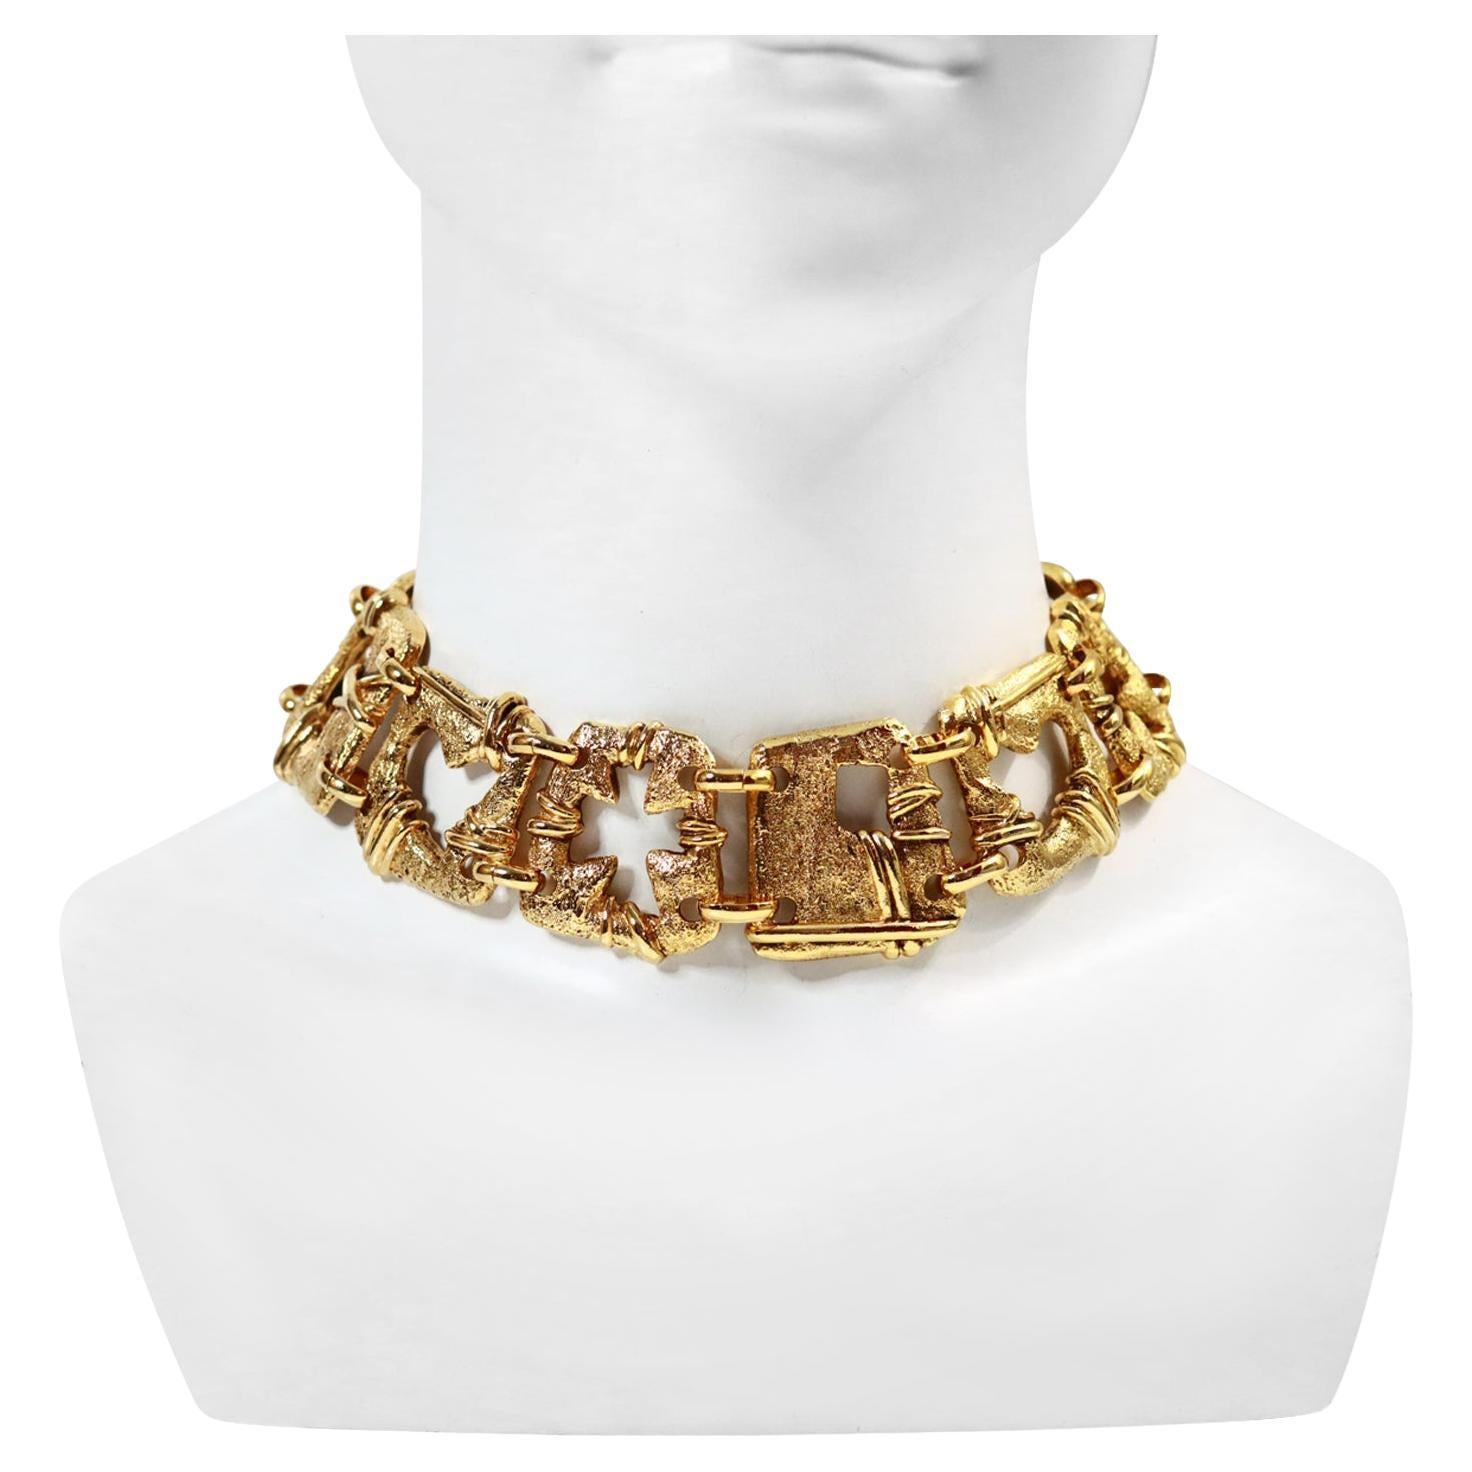 Vintage Christian Lacroix Gold Choker with Various Square Designs Circa 1990s. Iconic Lacroix with the Croxx and Heart. There are three extra rows of chain so it goes to 15